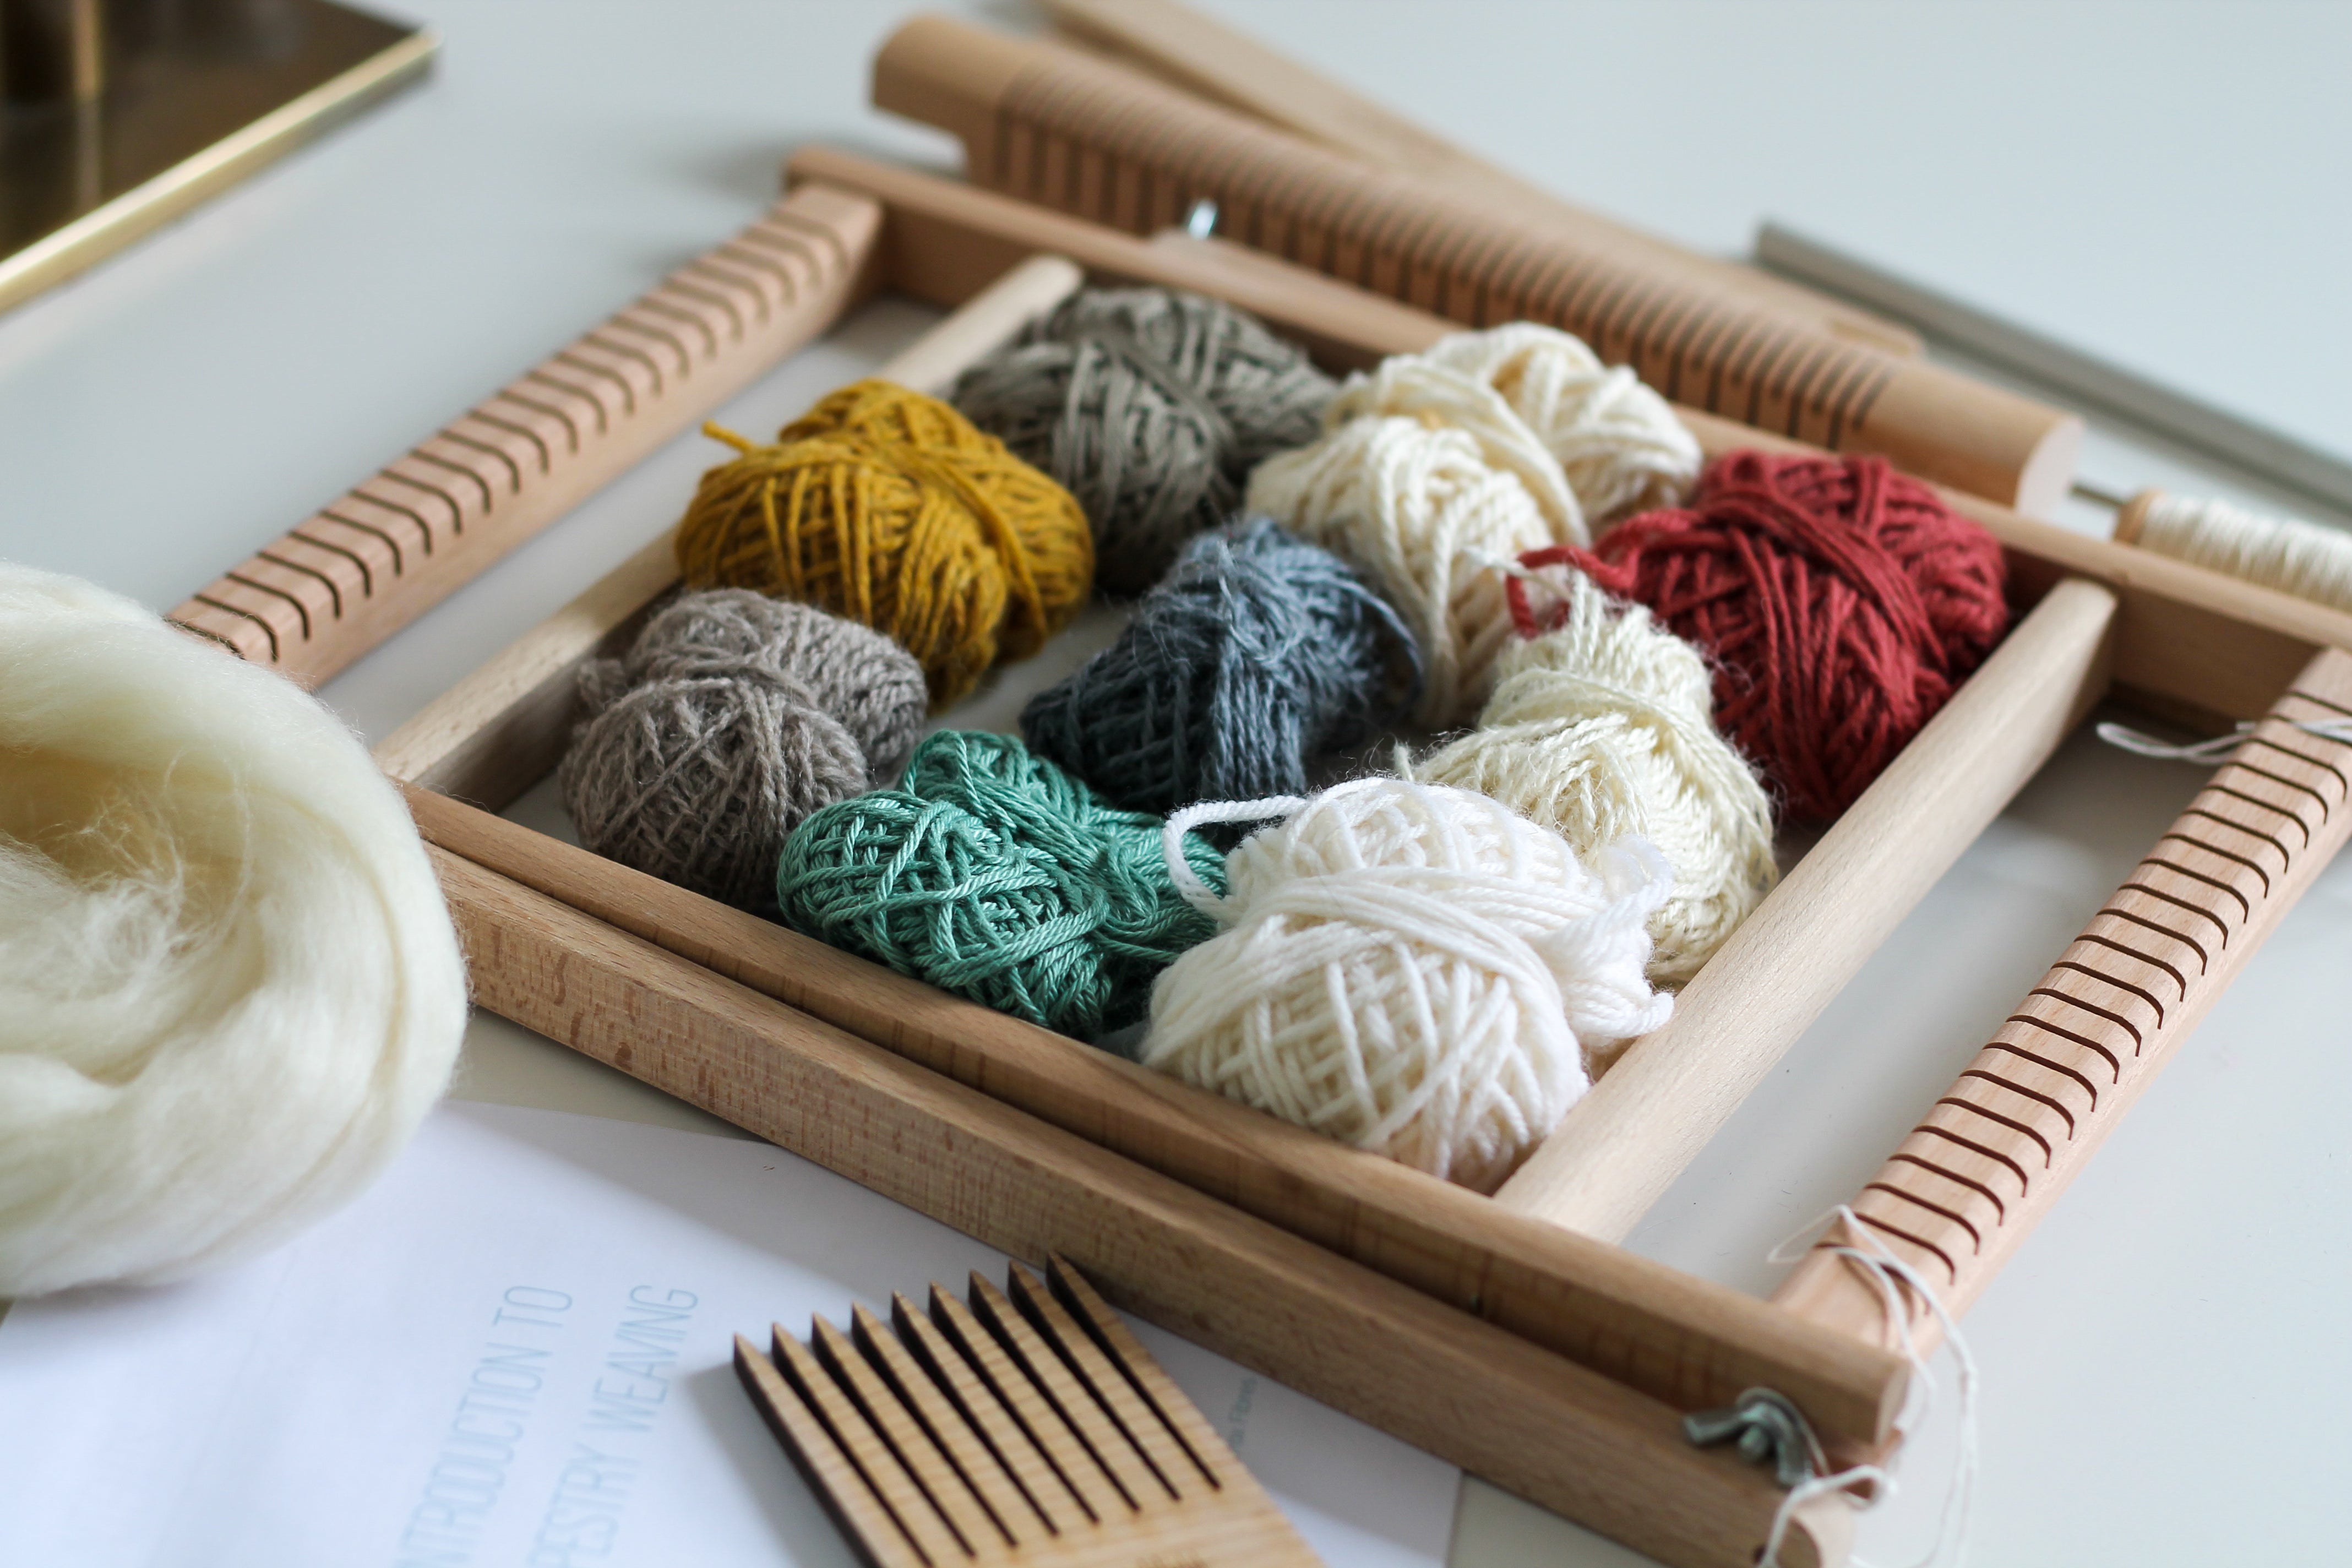 weaving loom, assorted yarn, tools and a booklet are laid out on a white table